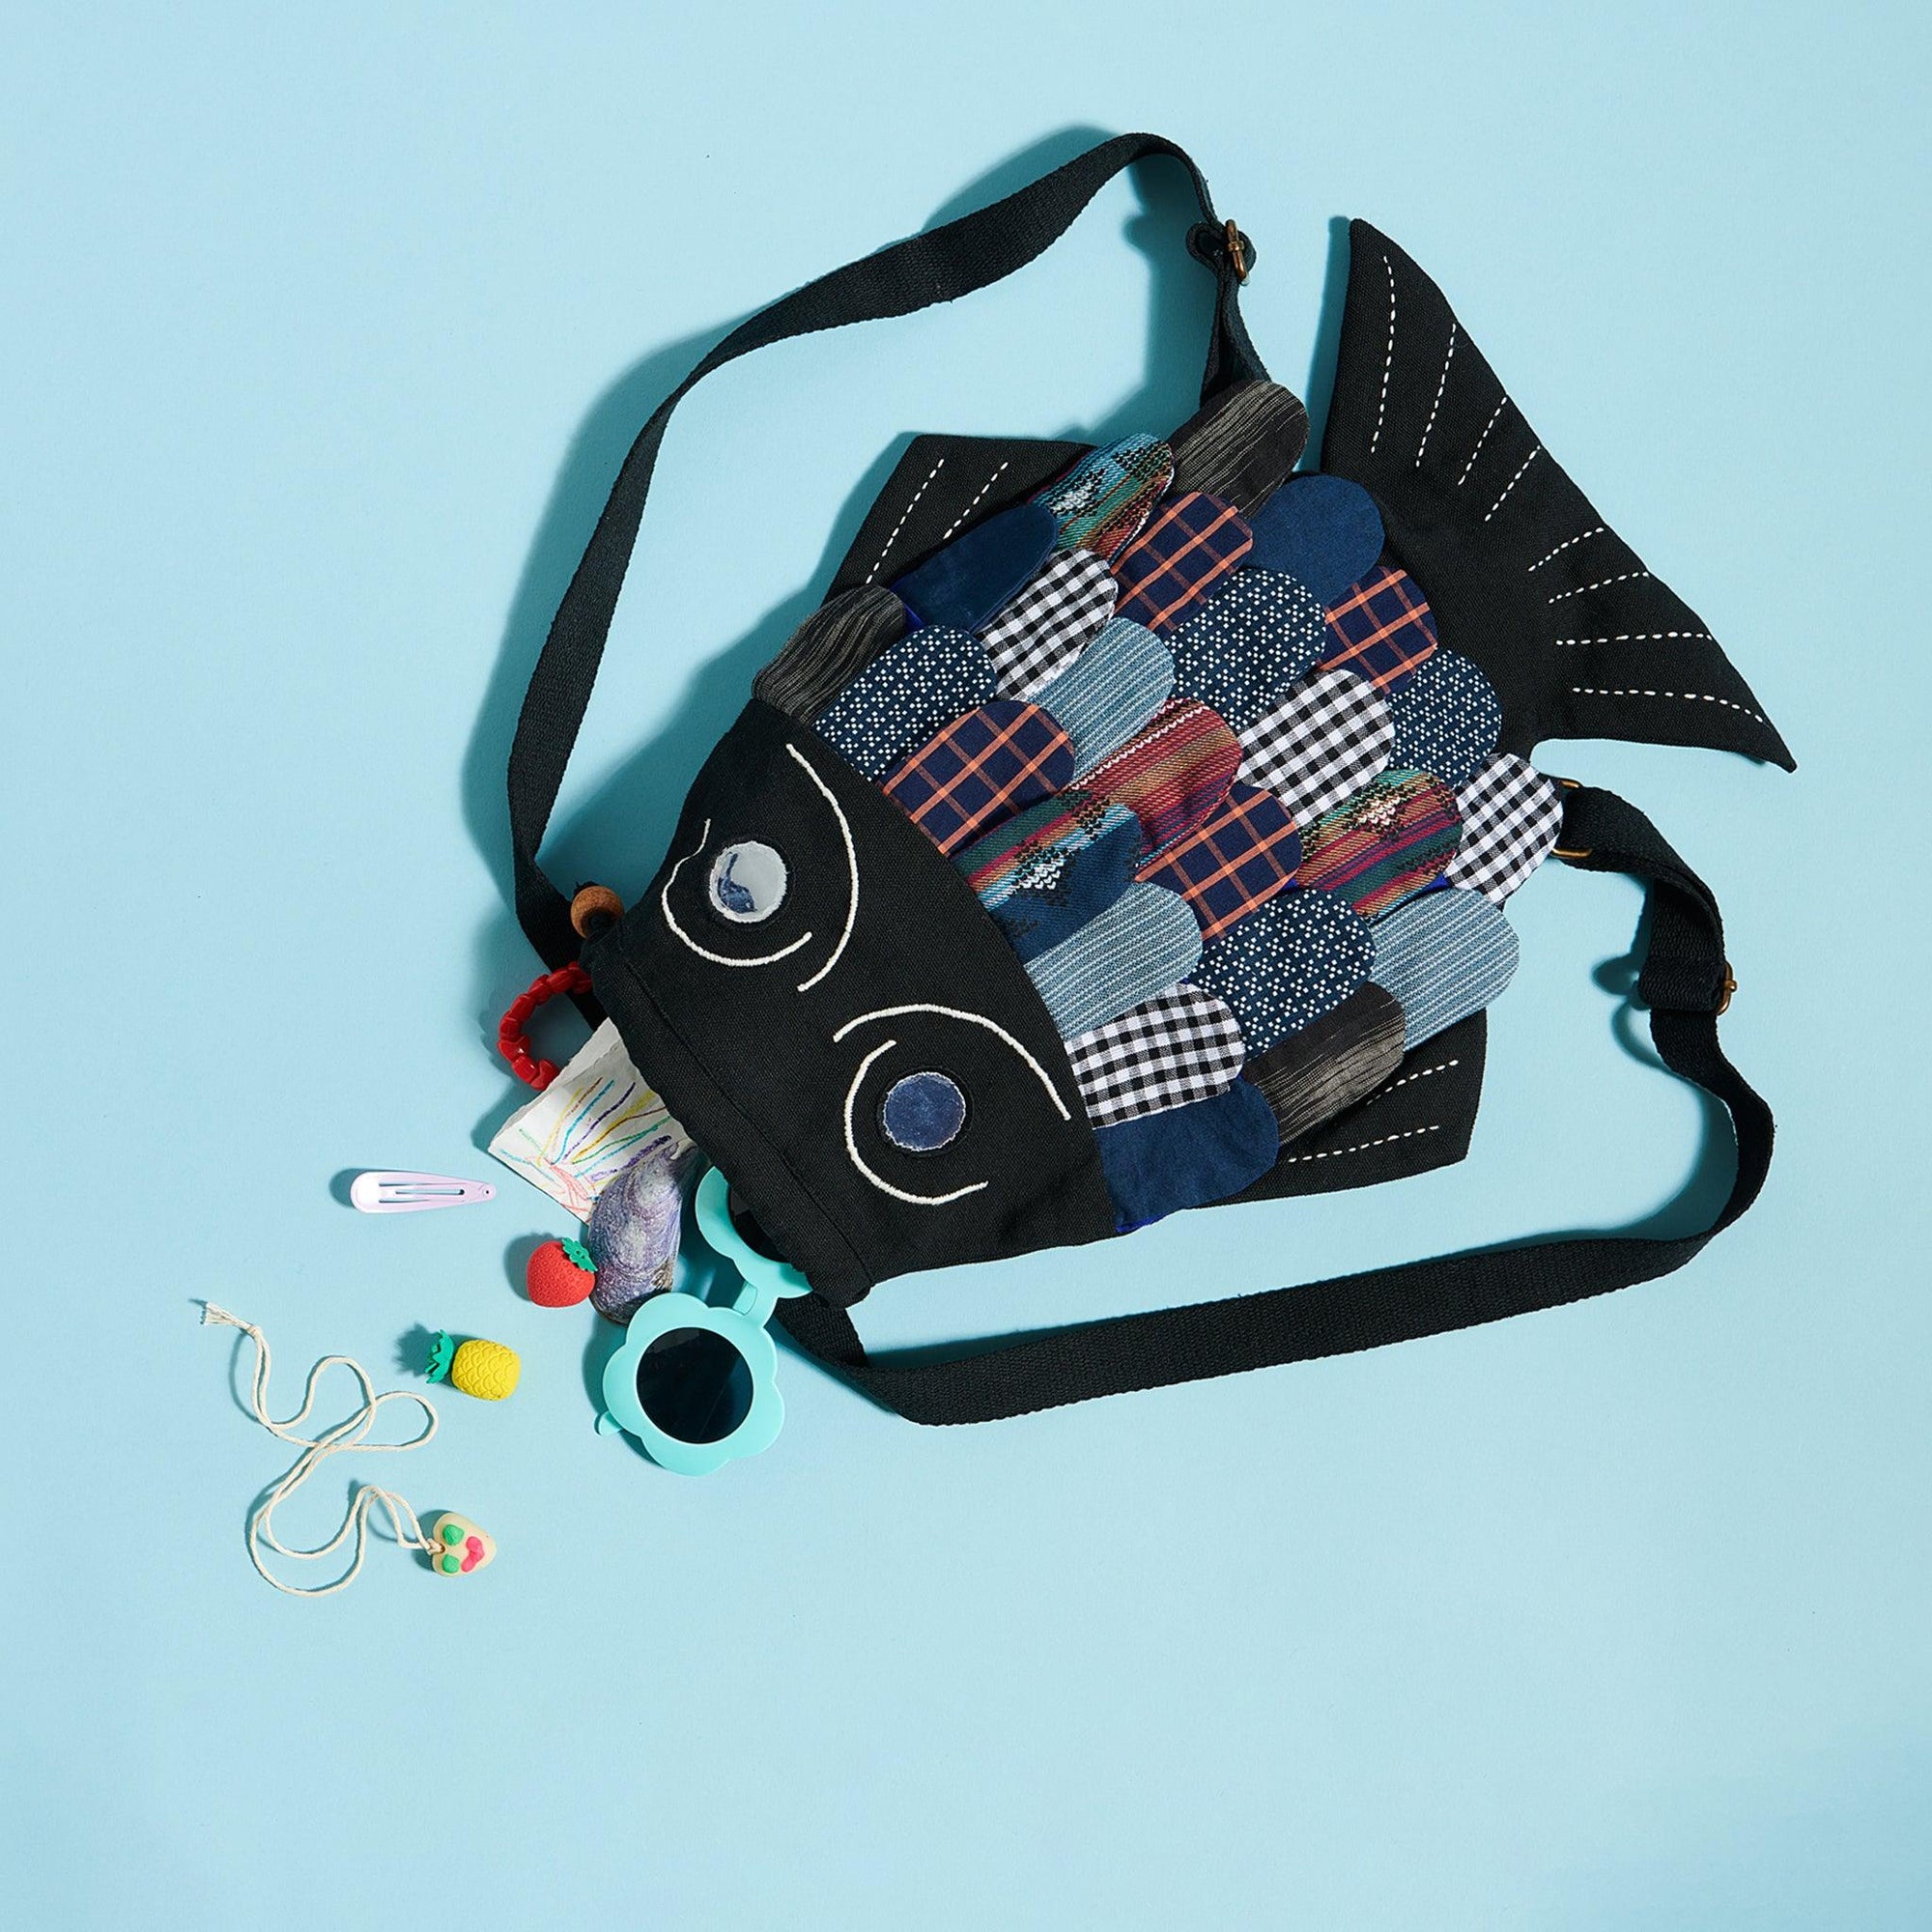 Black fish shaped backpack on a blue background. Fish has mettalic eyes and scales made out of patchwork fabrics